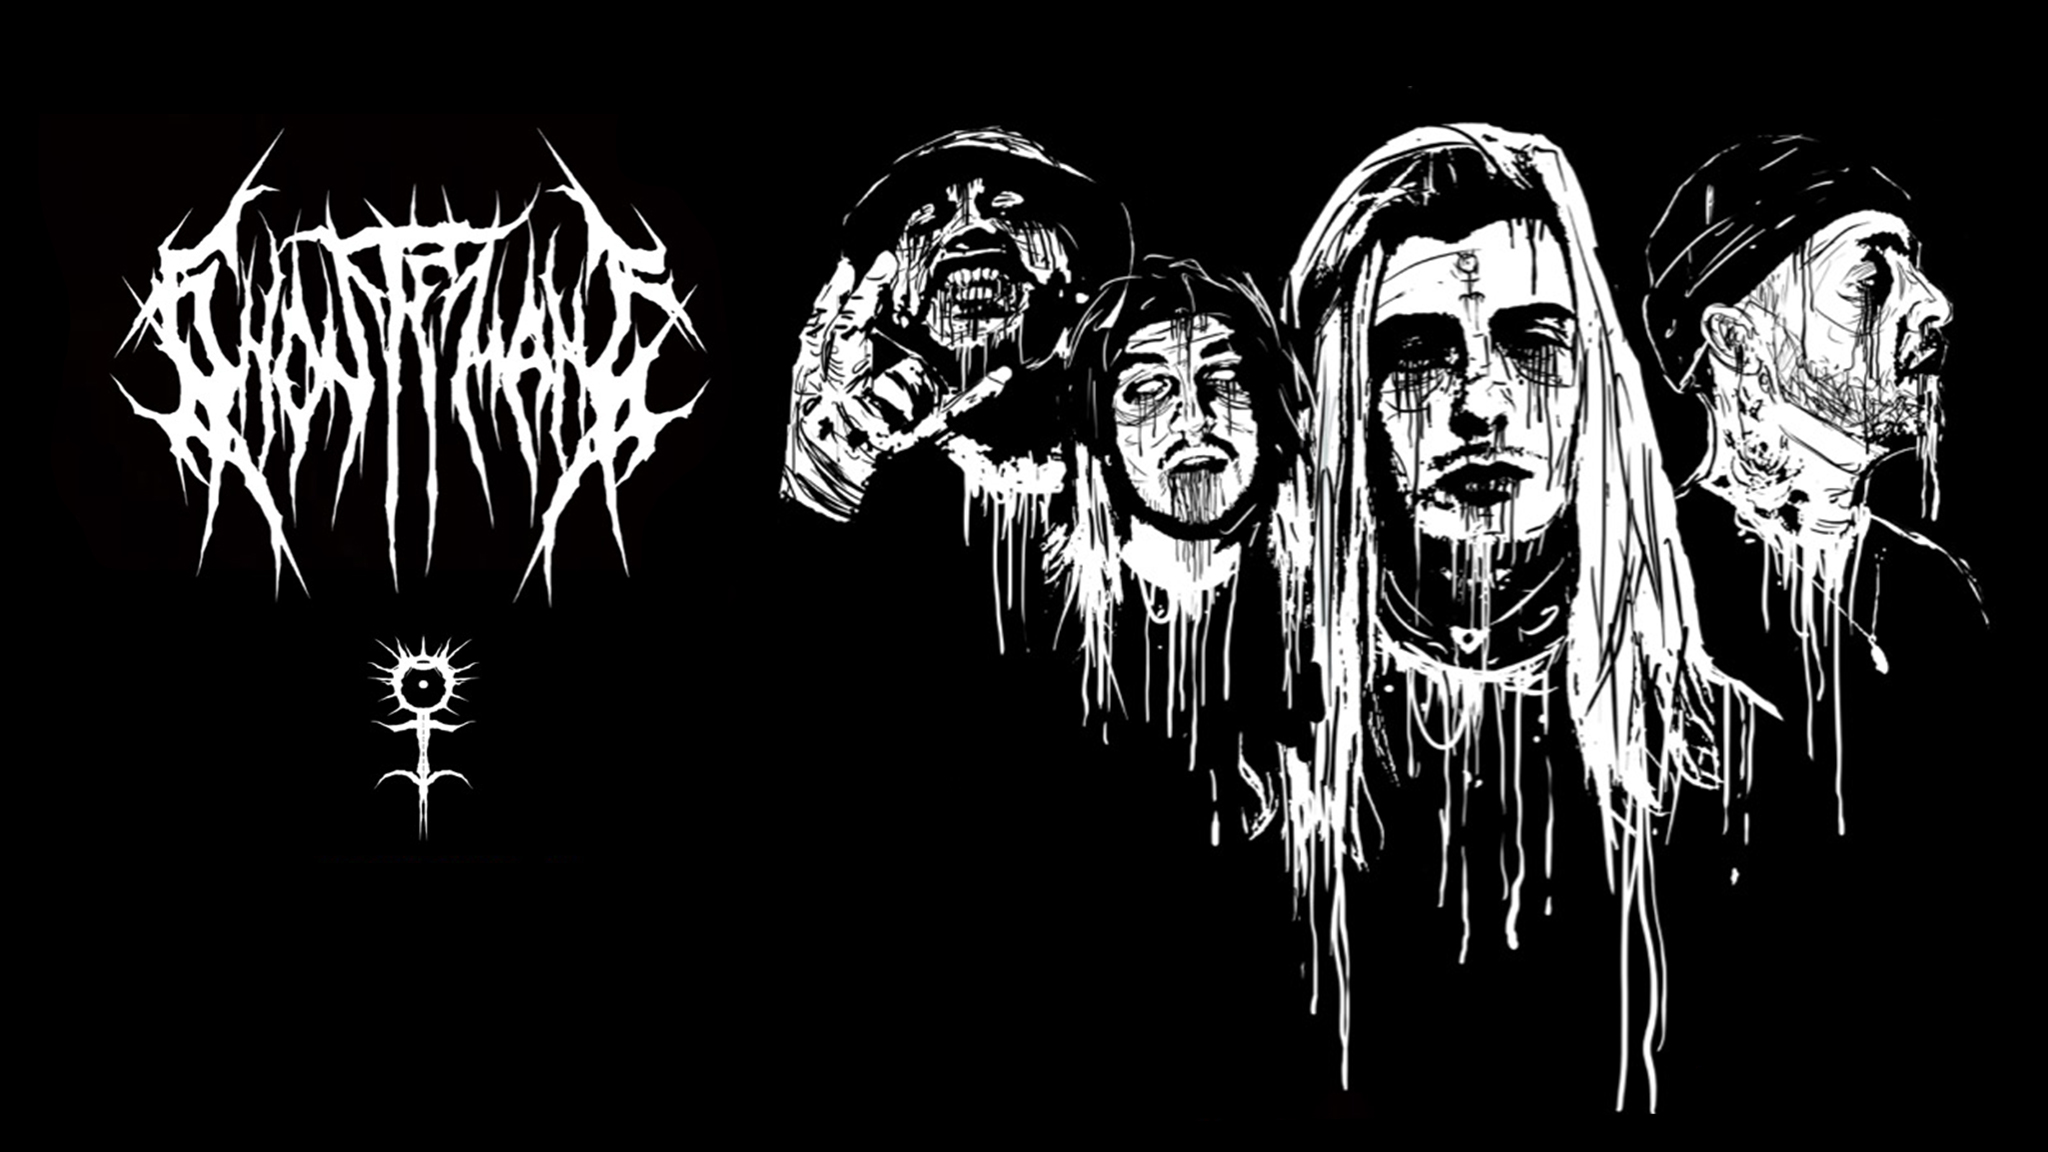 Download Ghostemane wallpaper by Jarrettlee  a8  Free on ZEDGE now  Browse millions of popular gbc Wallpapers an  Goth wallpaper Emo  wallpaper Edgy wallpaper